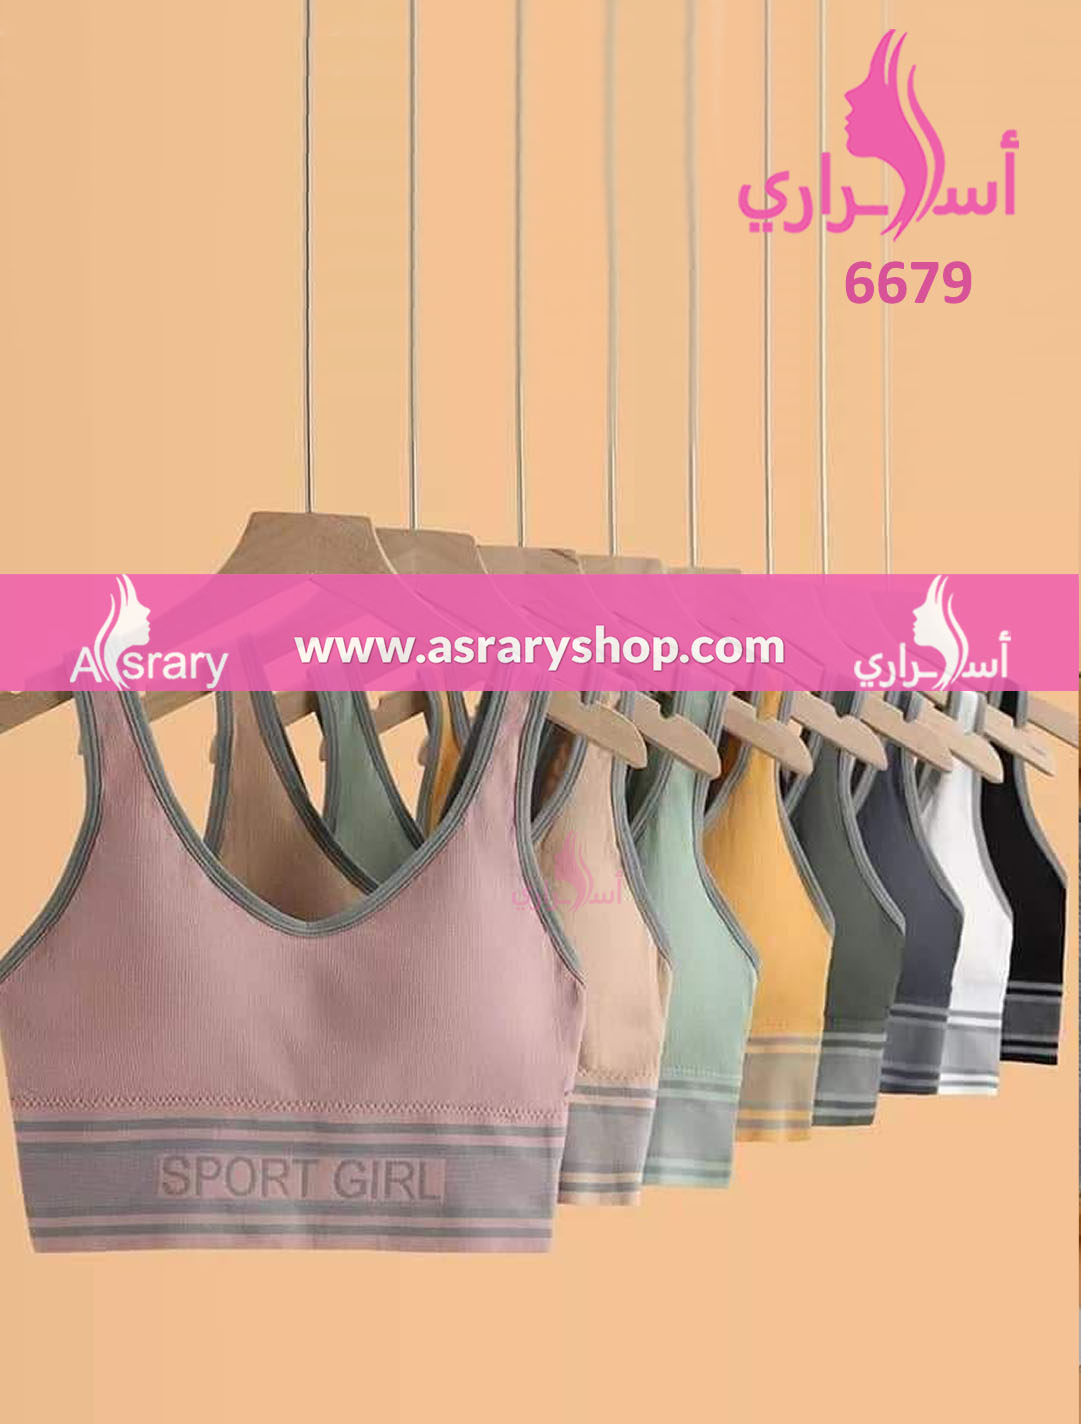 Soft Bra & Panty Sets at Best Prices in Egypt at Asrary - buy online Sports  Soft bra & panty Set – Asrary Shop